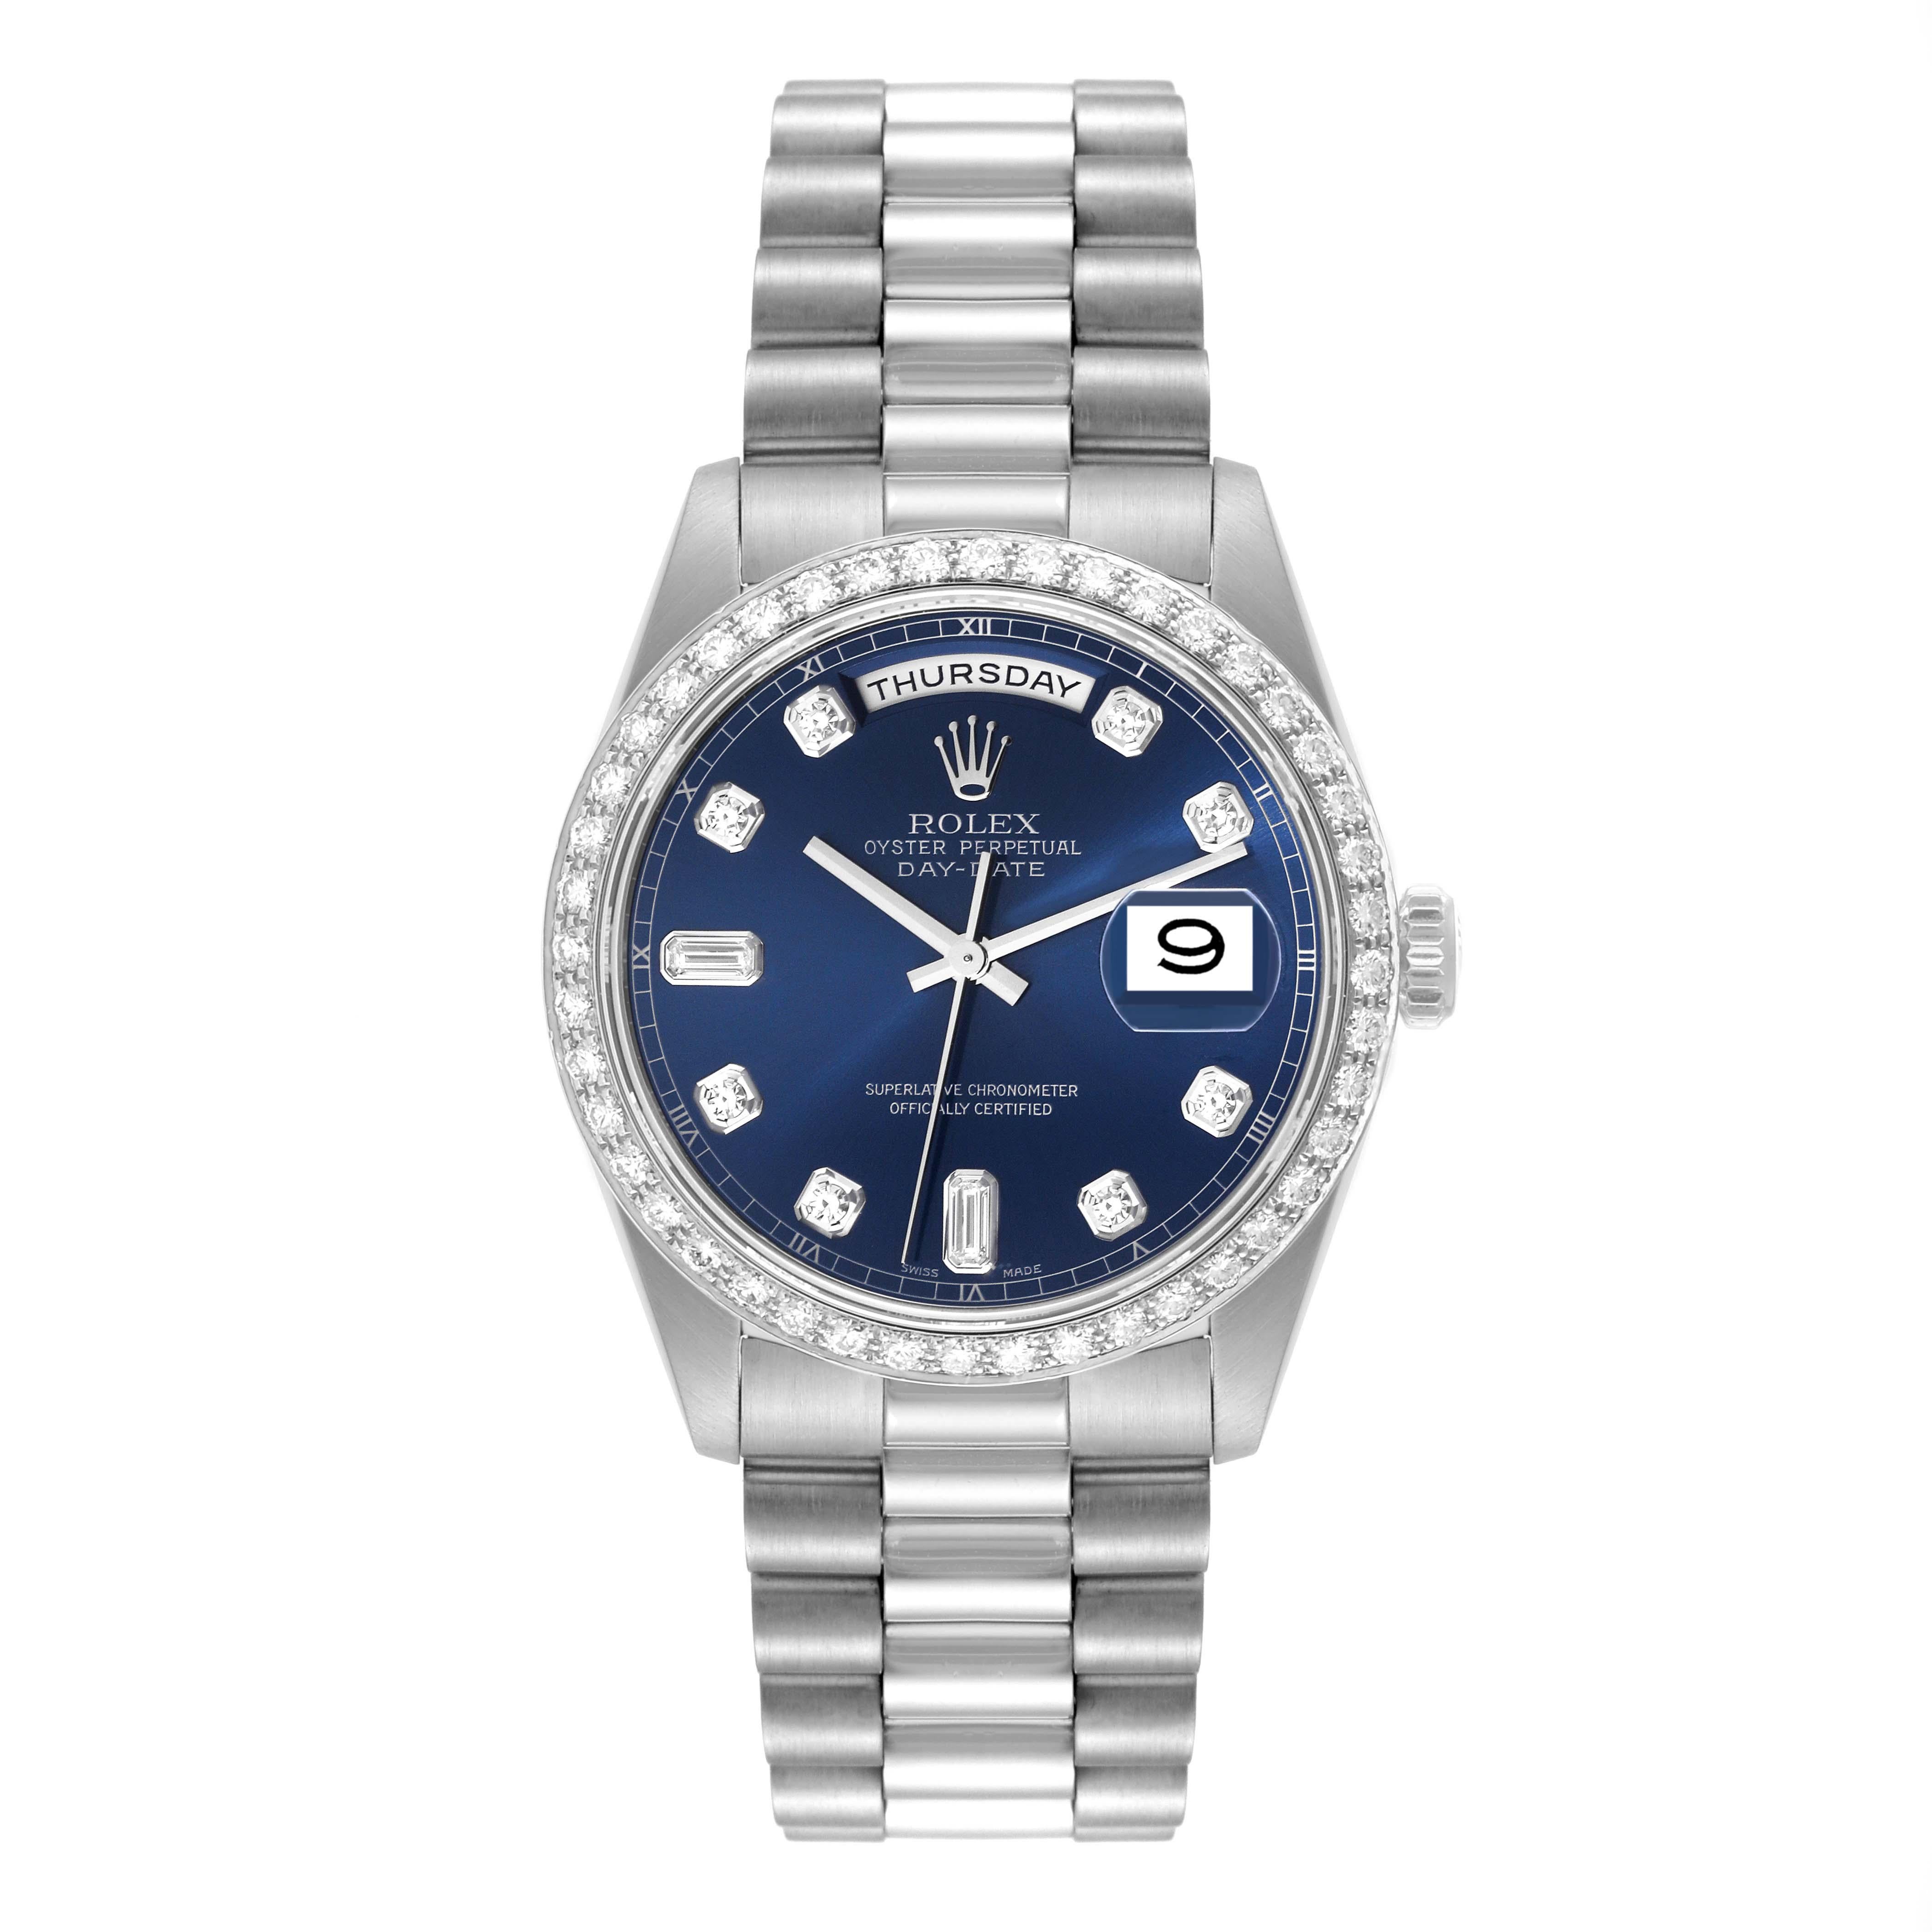 Rolex President Day-Date Blue Diamond Dial Platinum Mens Watch 18346. Officially certified chronometer automatic self-winding movement with quickset date function. Platinum oyster case 36.0 mm in diameter. Rolex logo on the crown. Original Rolex